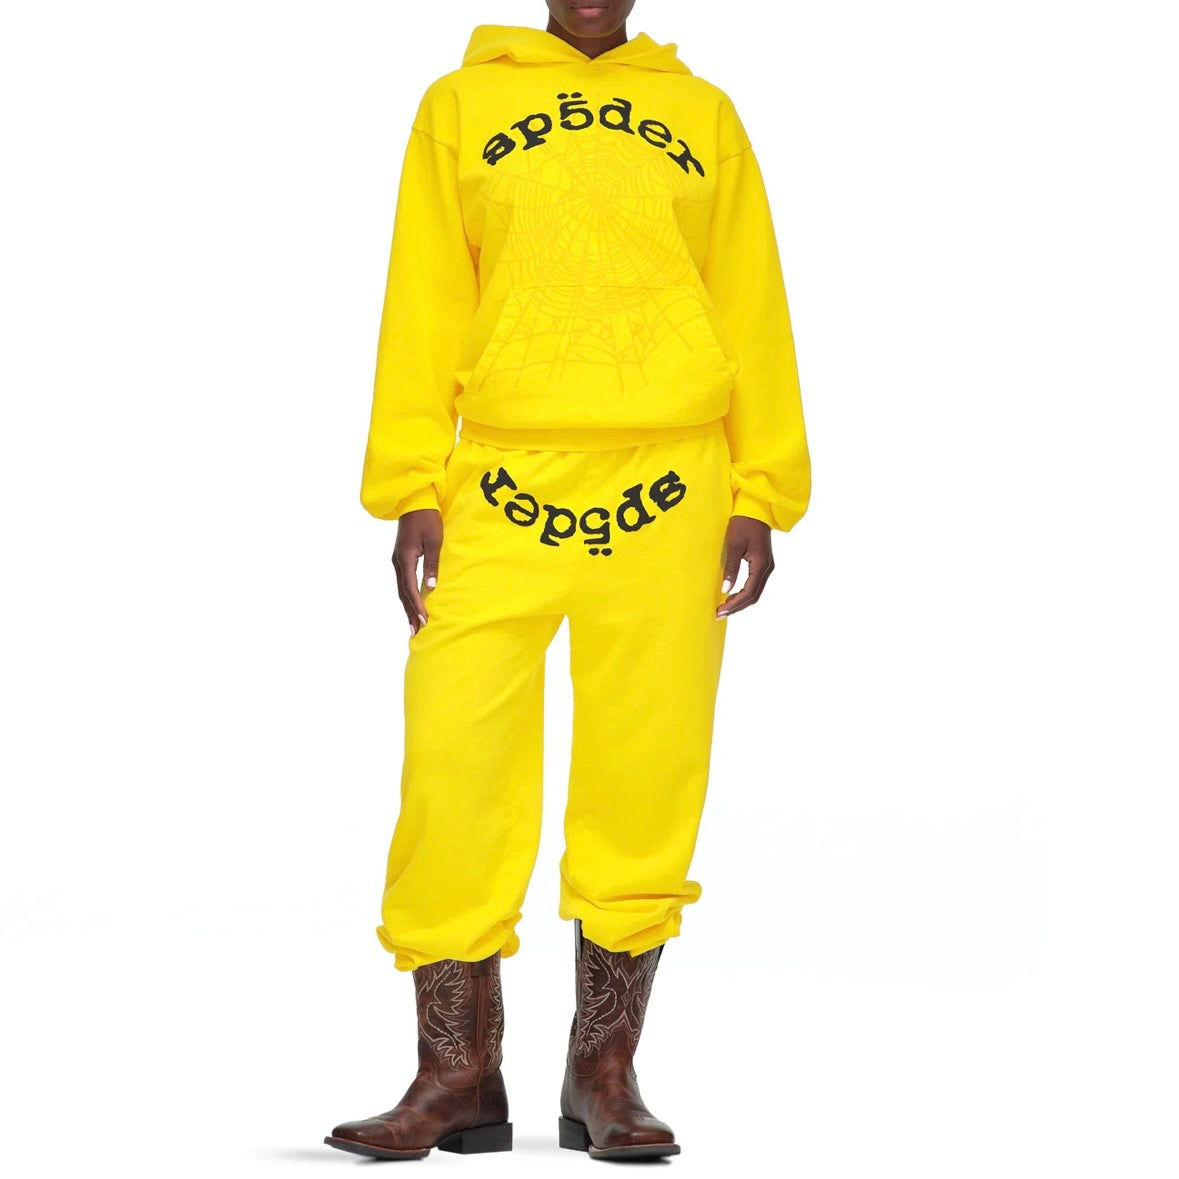 Sp5der Yellow Black Legacy Hoodie On Body With Boots